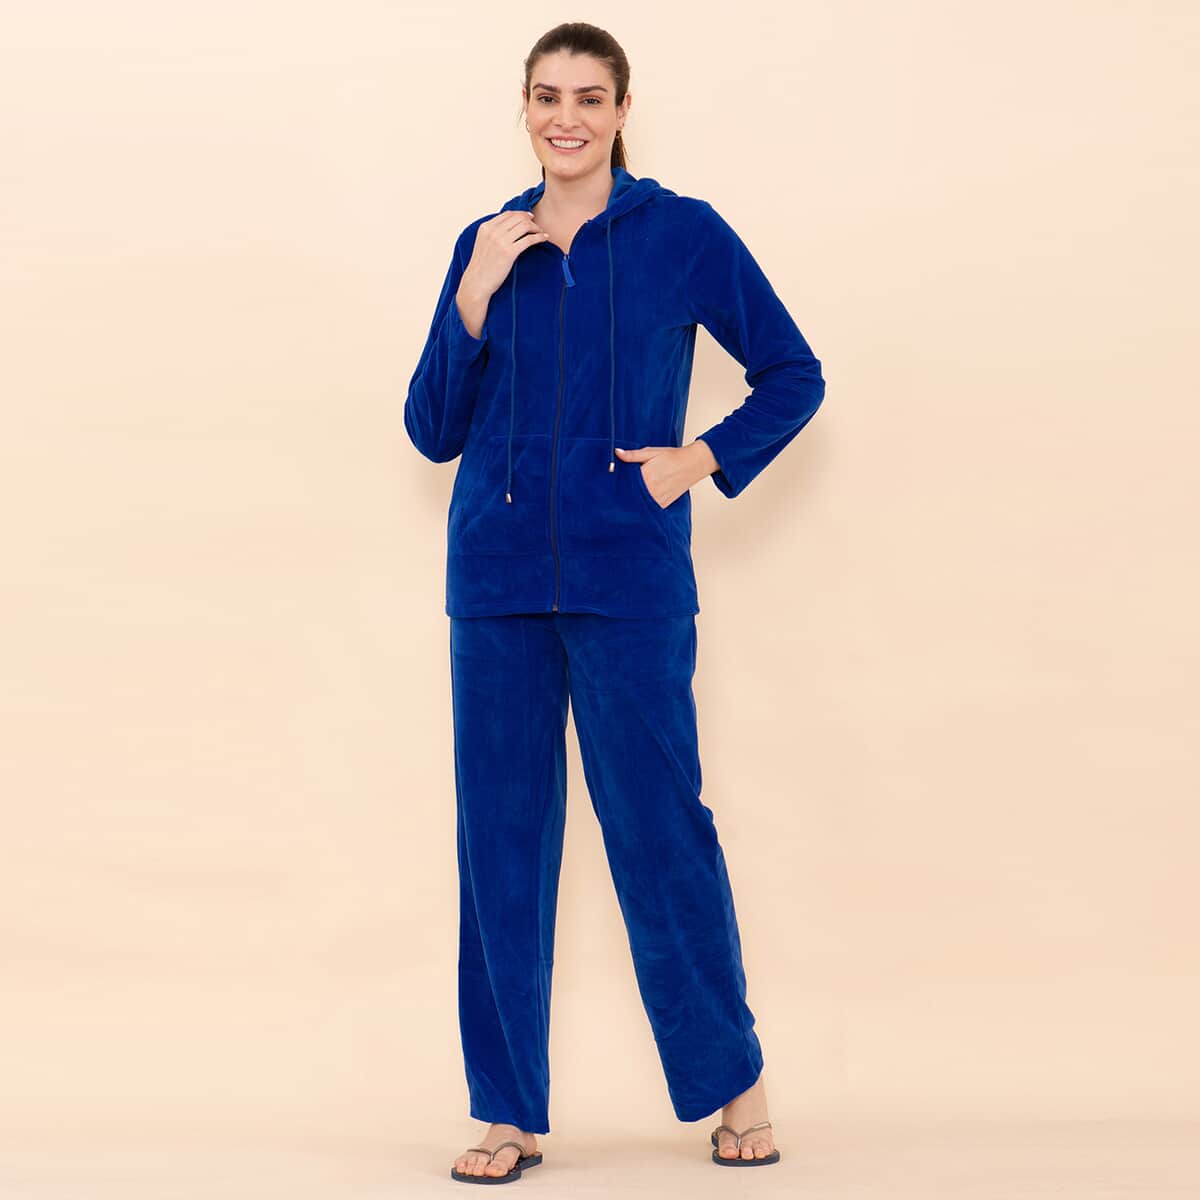 Tamsy LUX Blue Velour Track Suit Set - XL image number 0